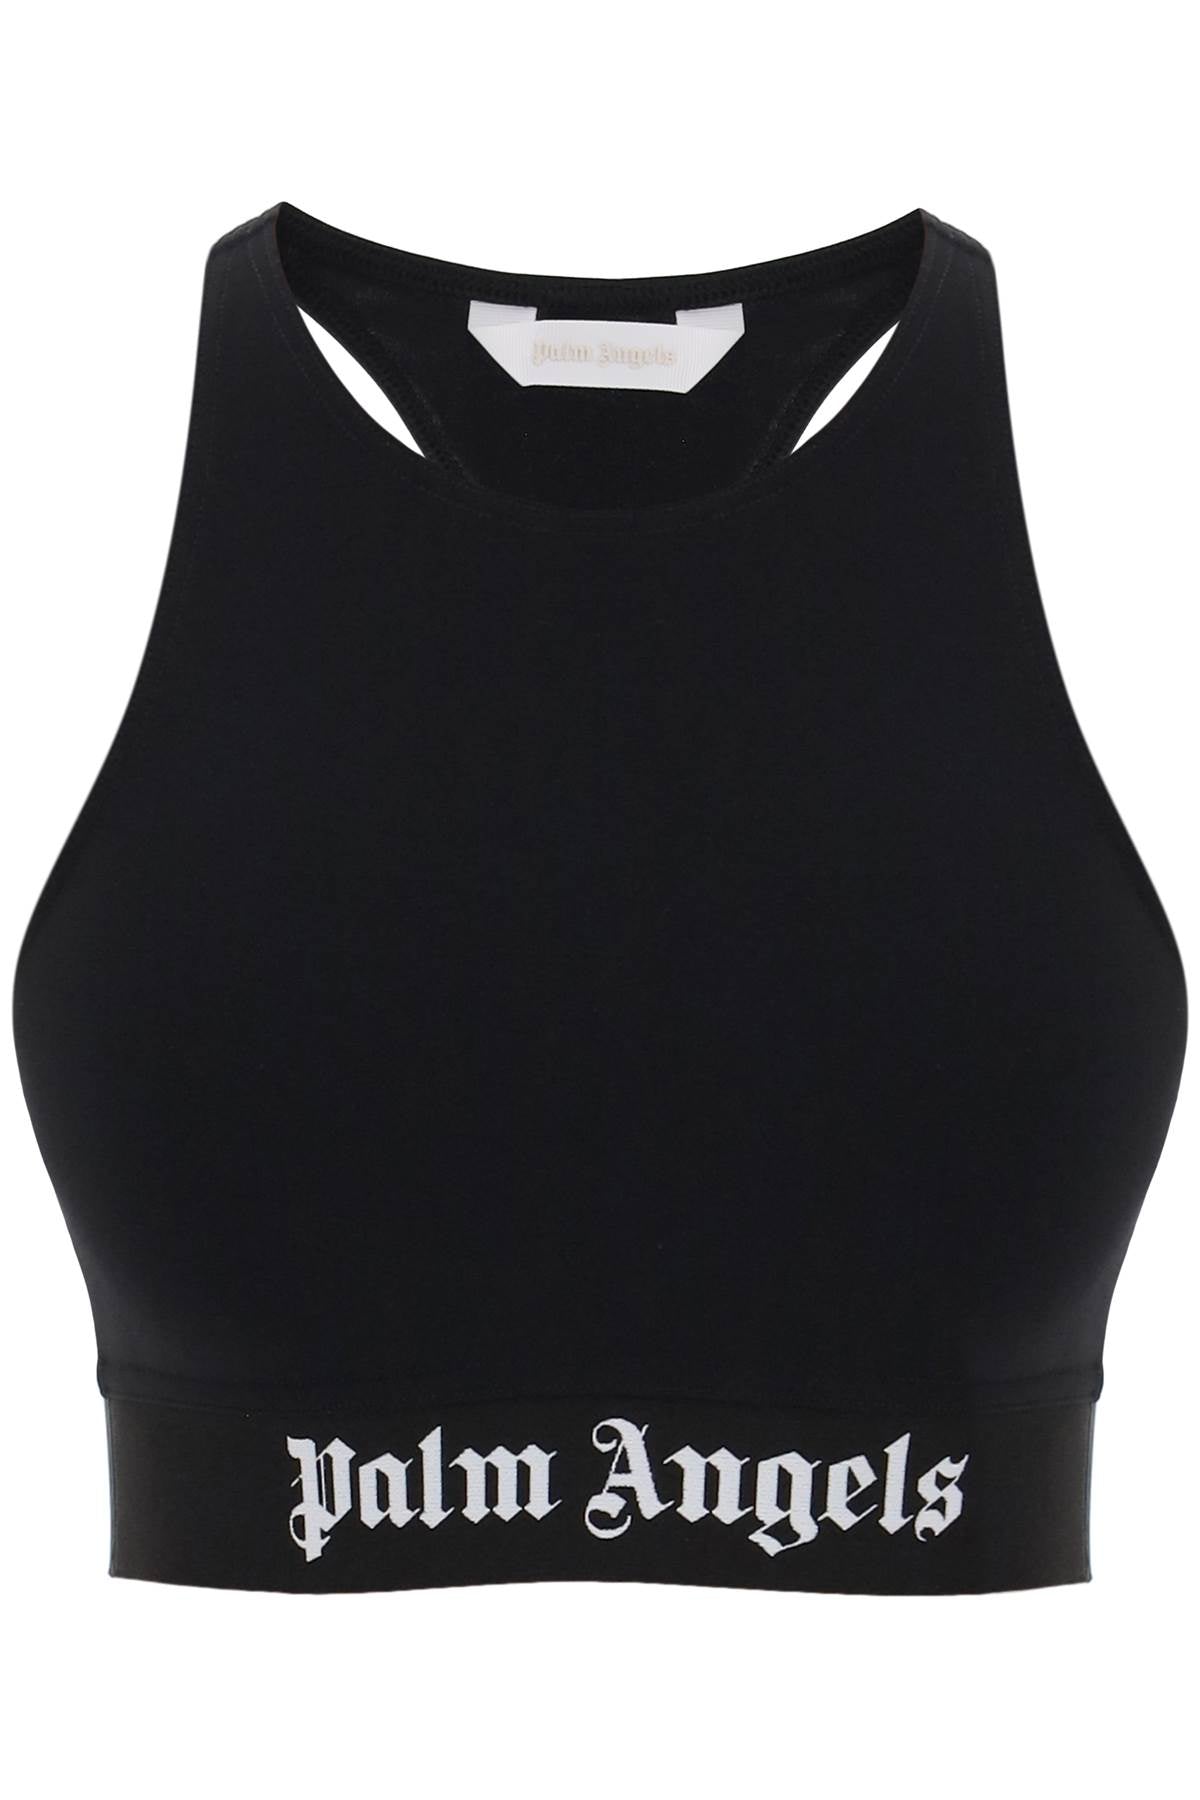 Palm Angels Palm angels "sport bra with branded band"